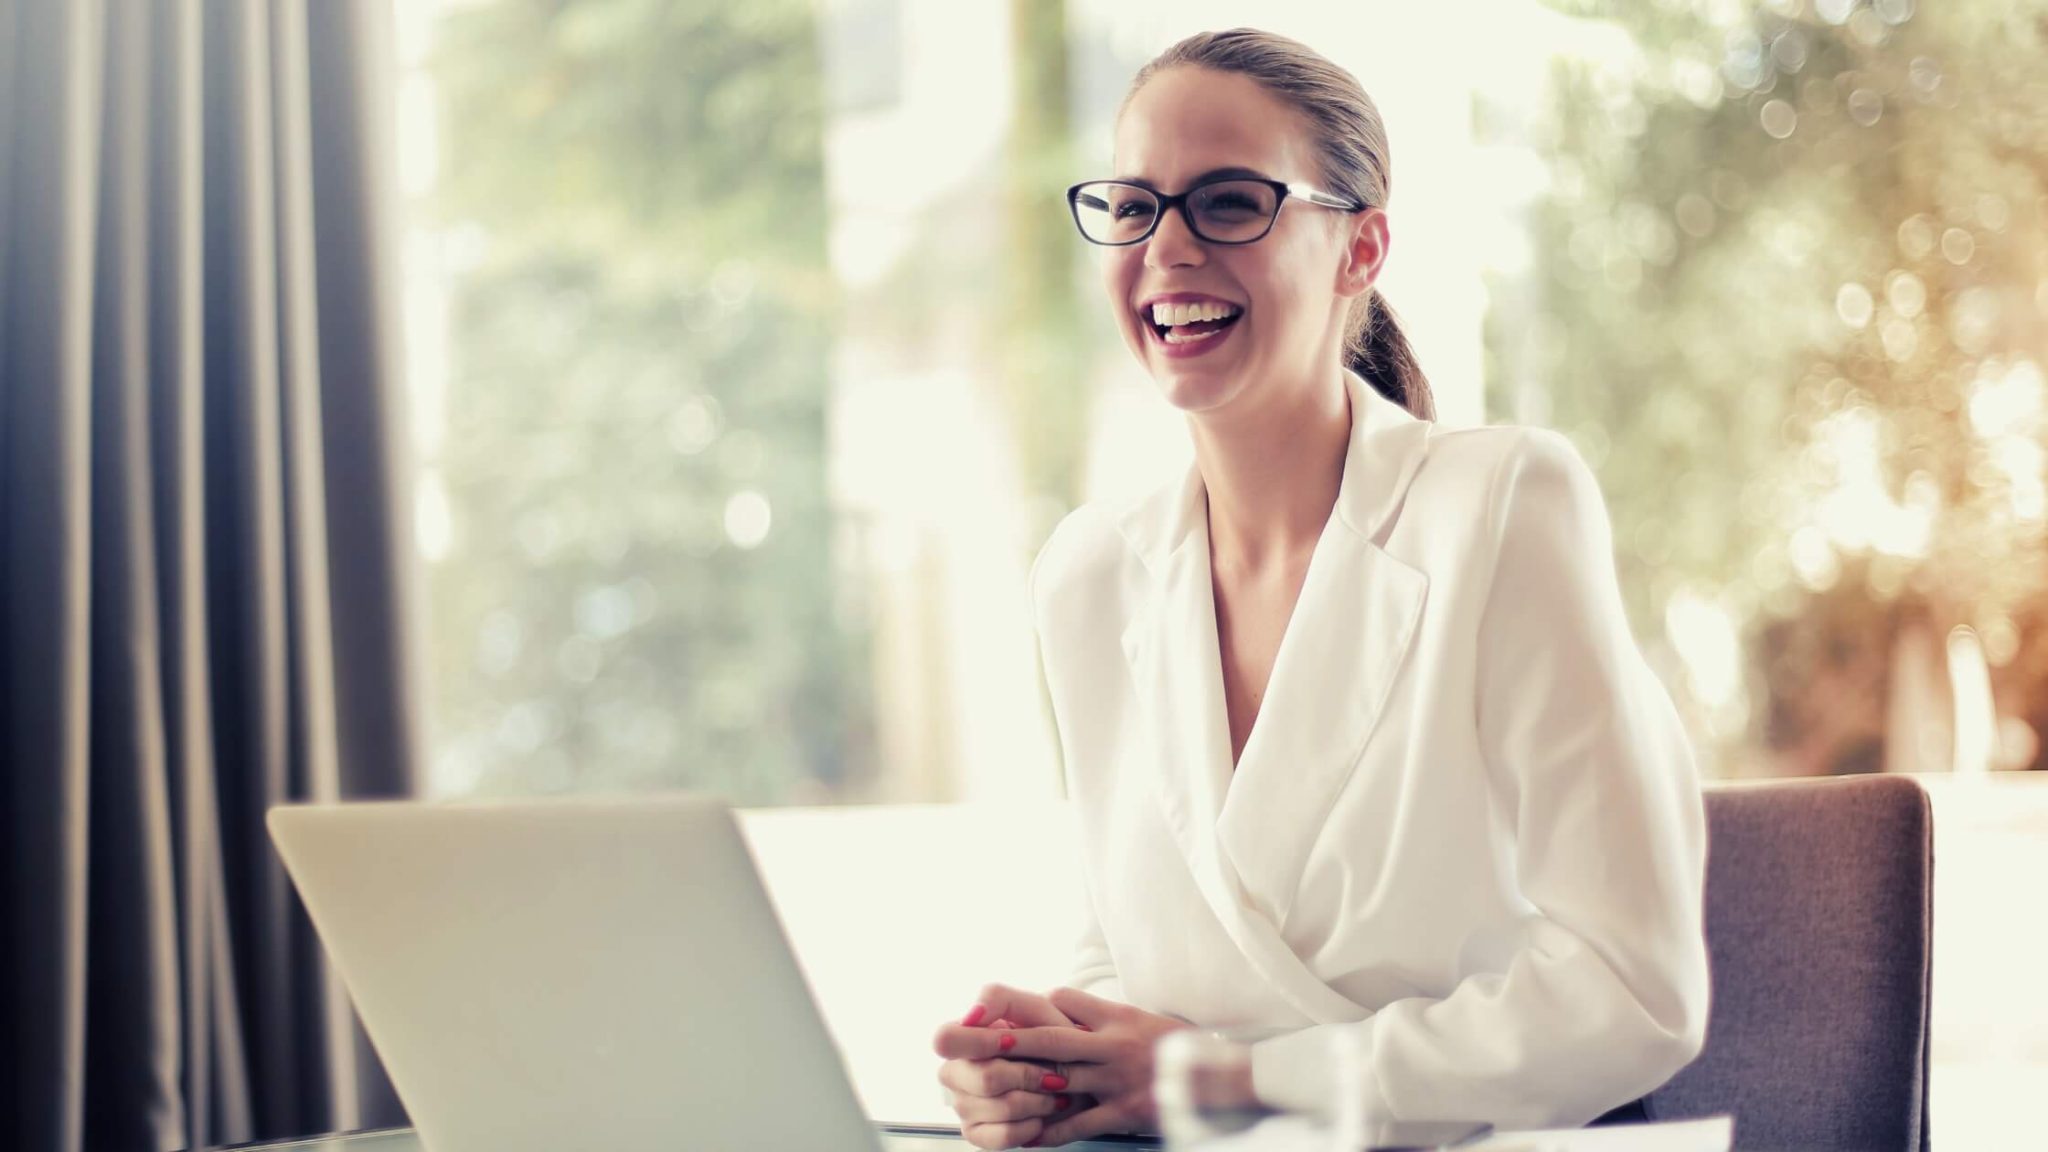 Well-dressed woman with glasses, smiling in front of her laptop.